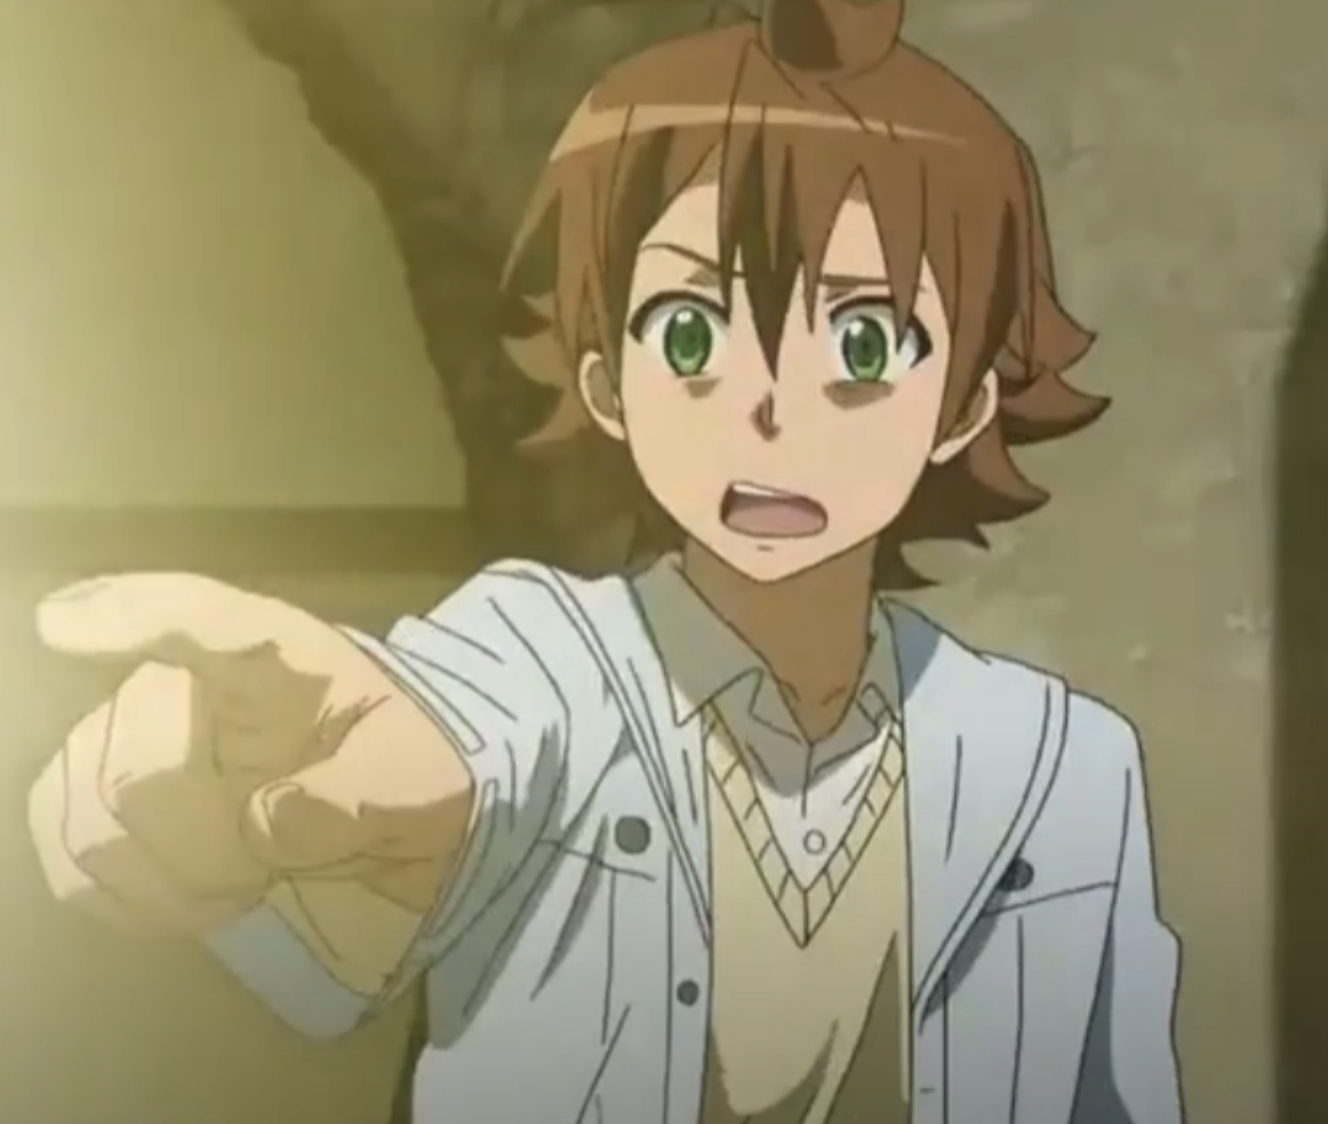 Tatsumi pointing at something with a confused look on his face